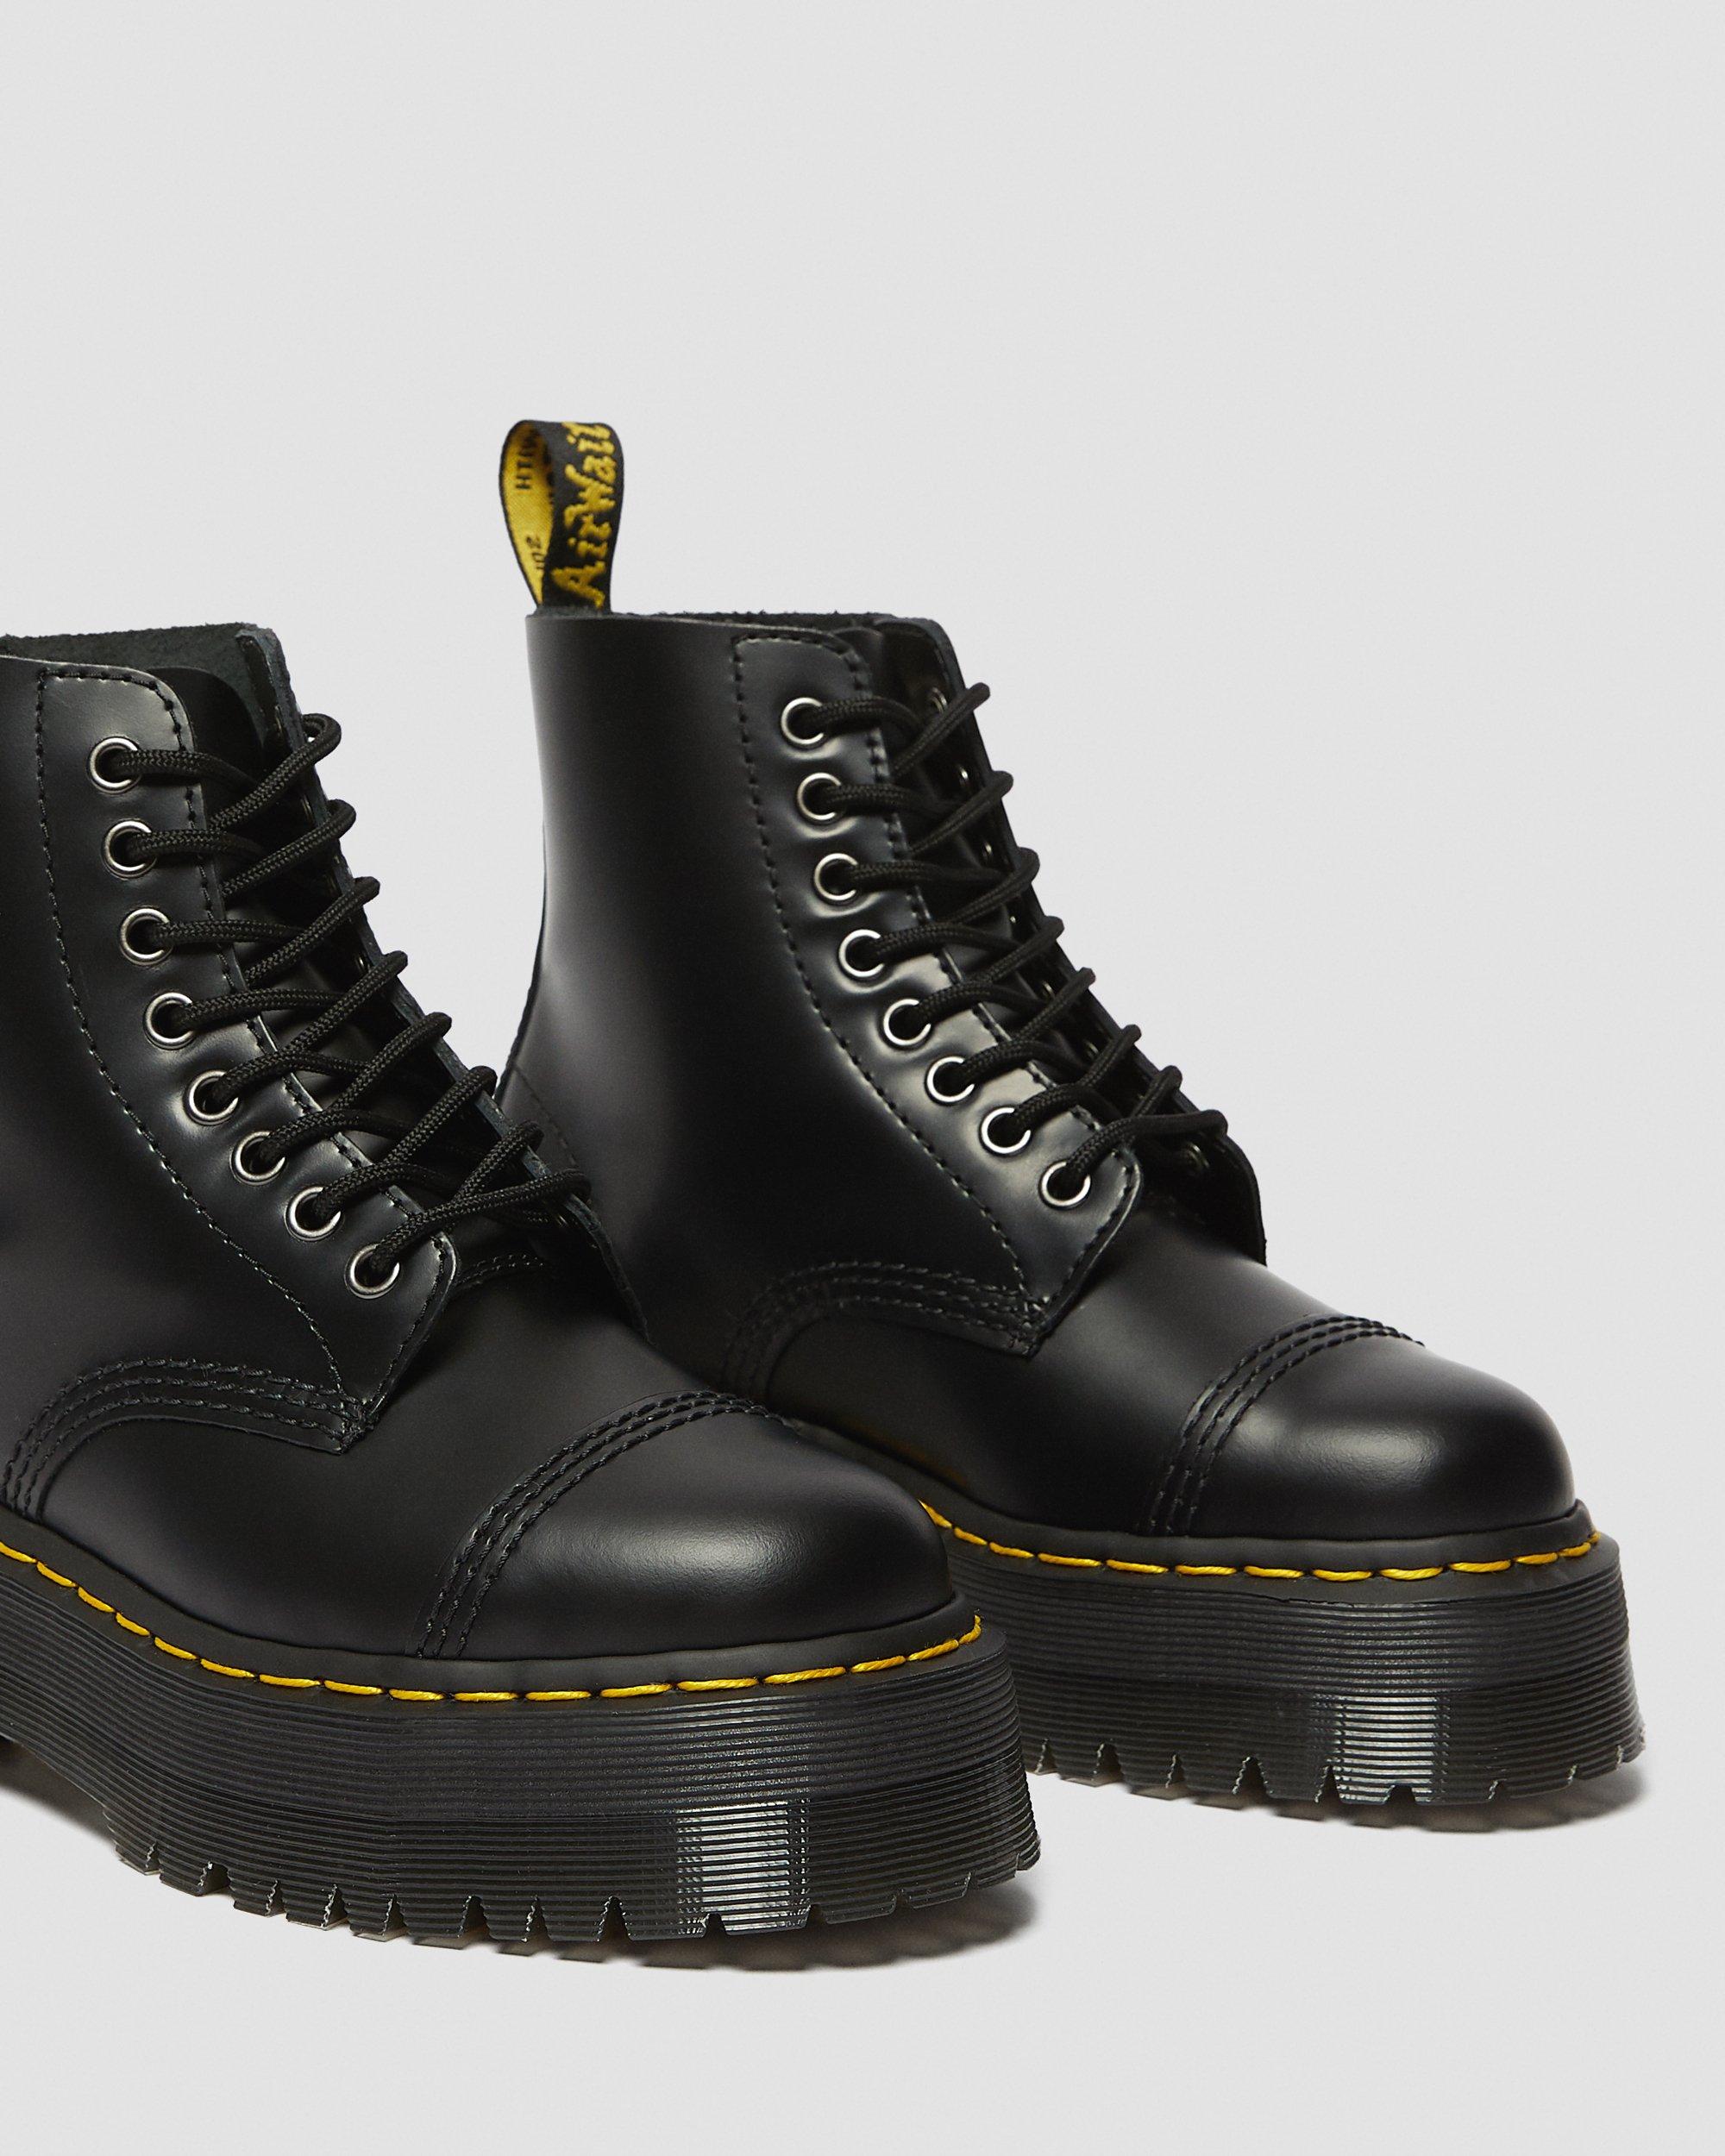 DR MARTENS Sinclair Smooth Women's Leather Platform Boots